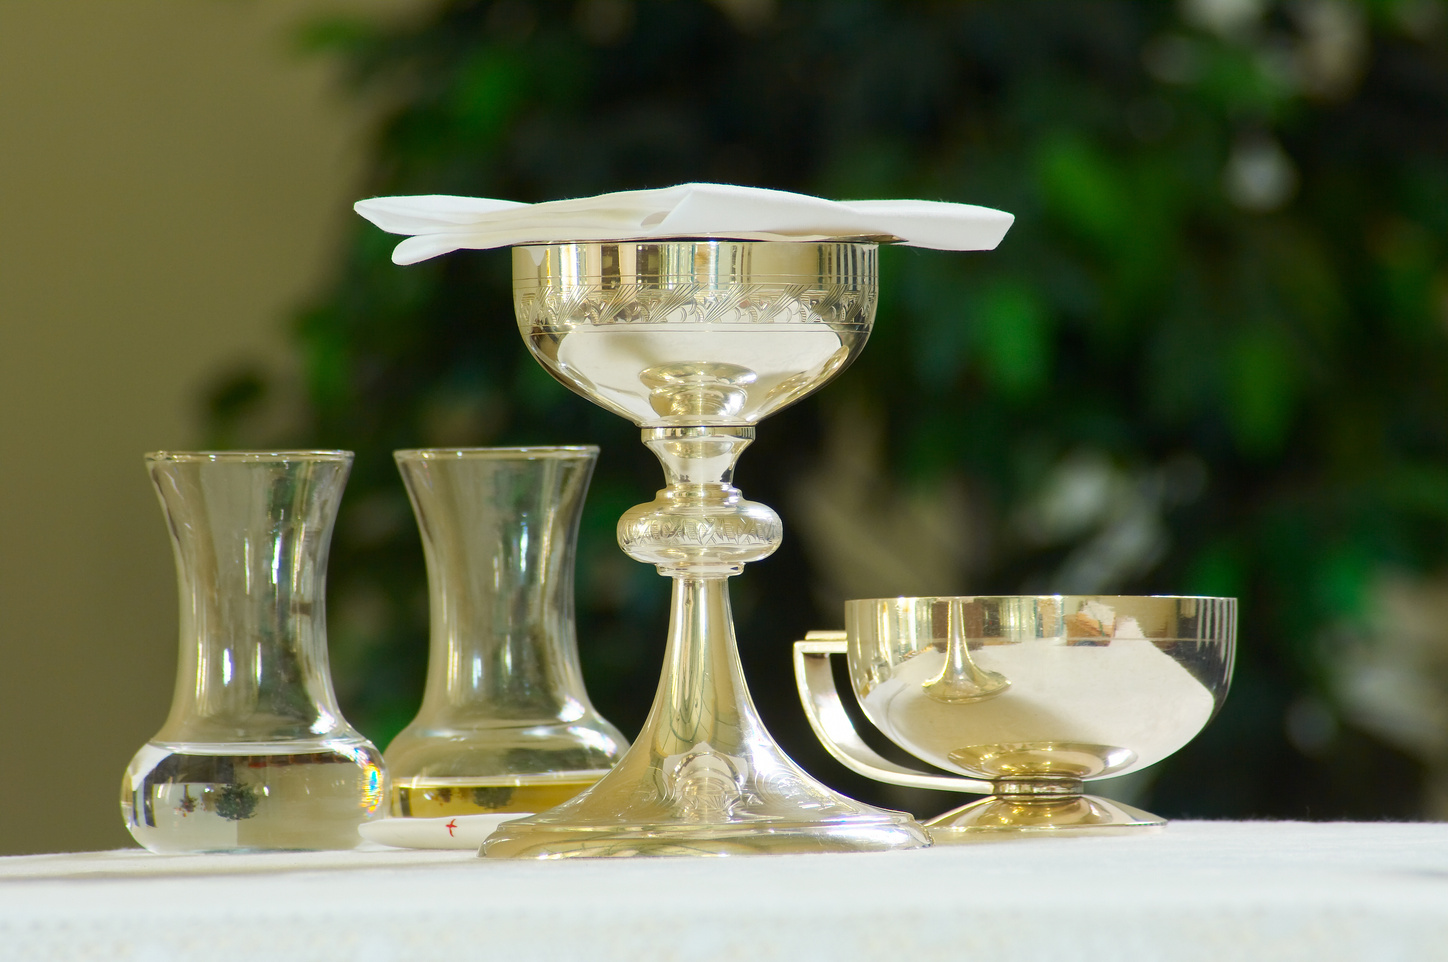 Communion, cup, bowl, and glasses